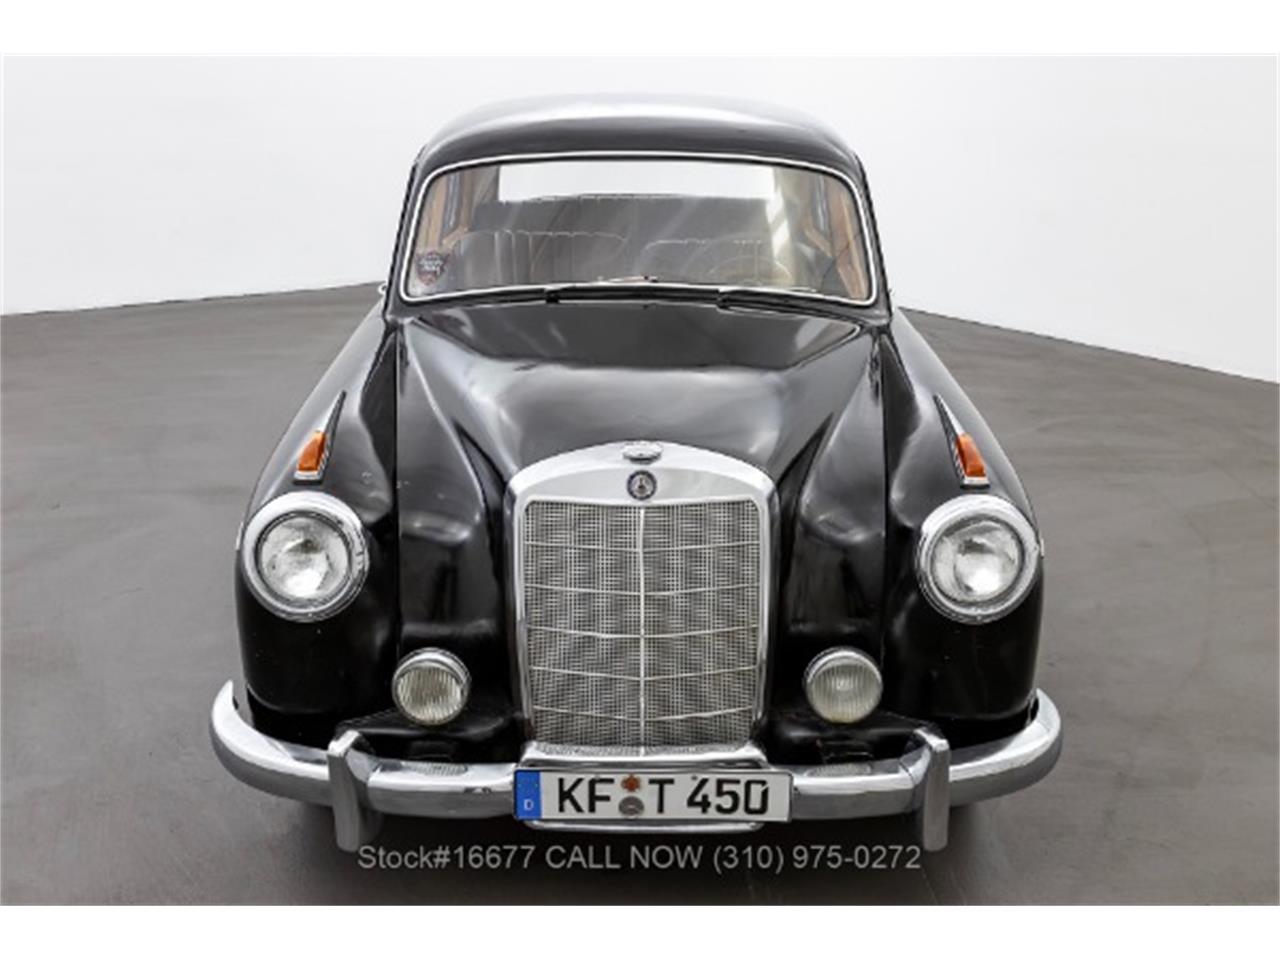 For Sale: 1956 Mercedes-Benz 220S in Beverly Hills, California for sale in Beverly Hills, CA